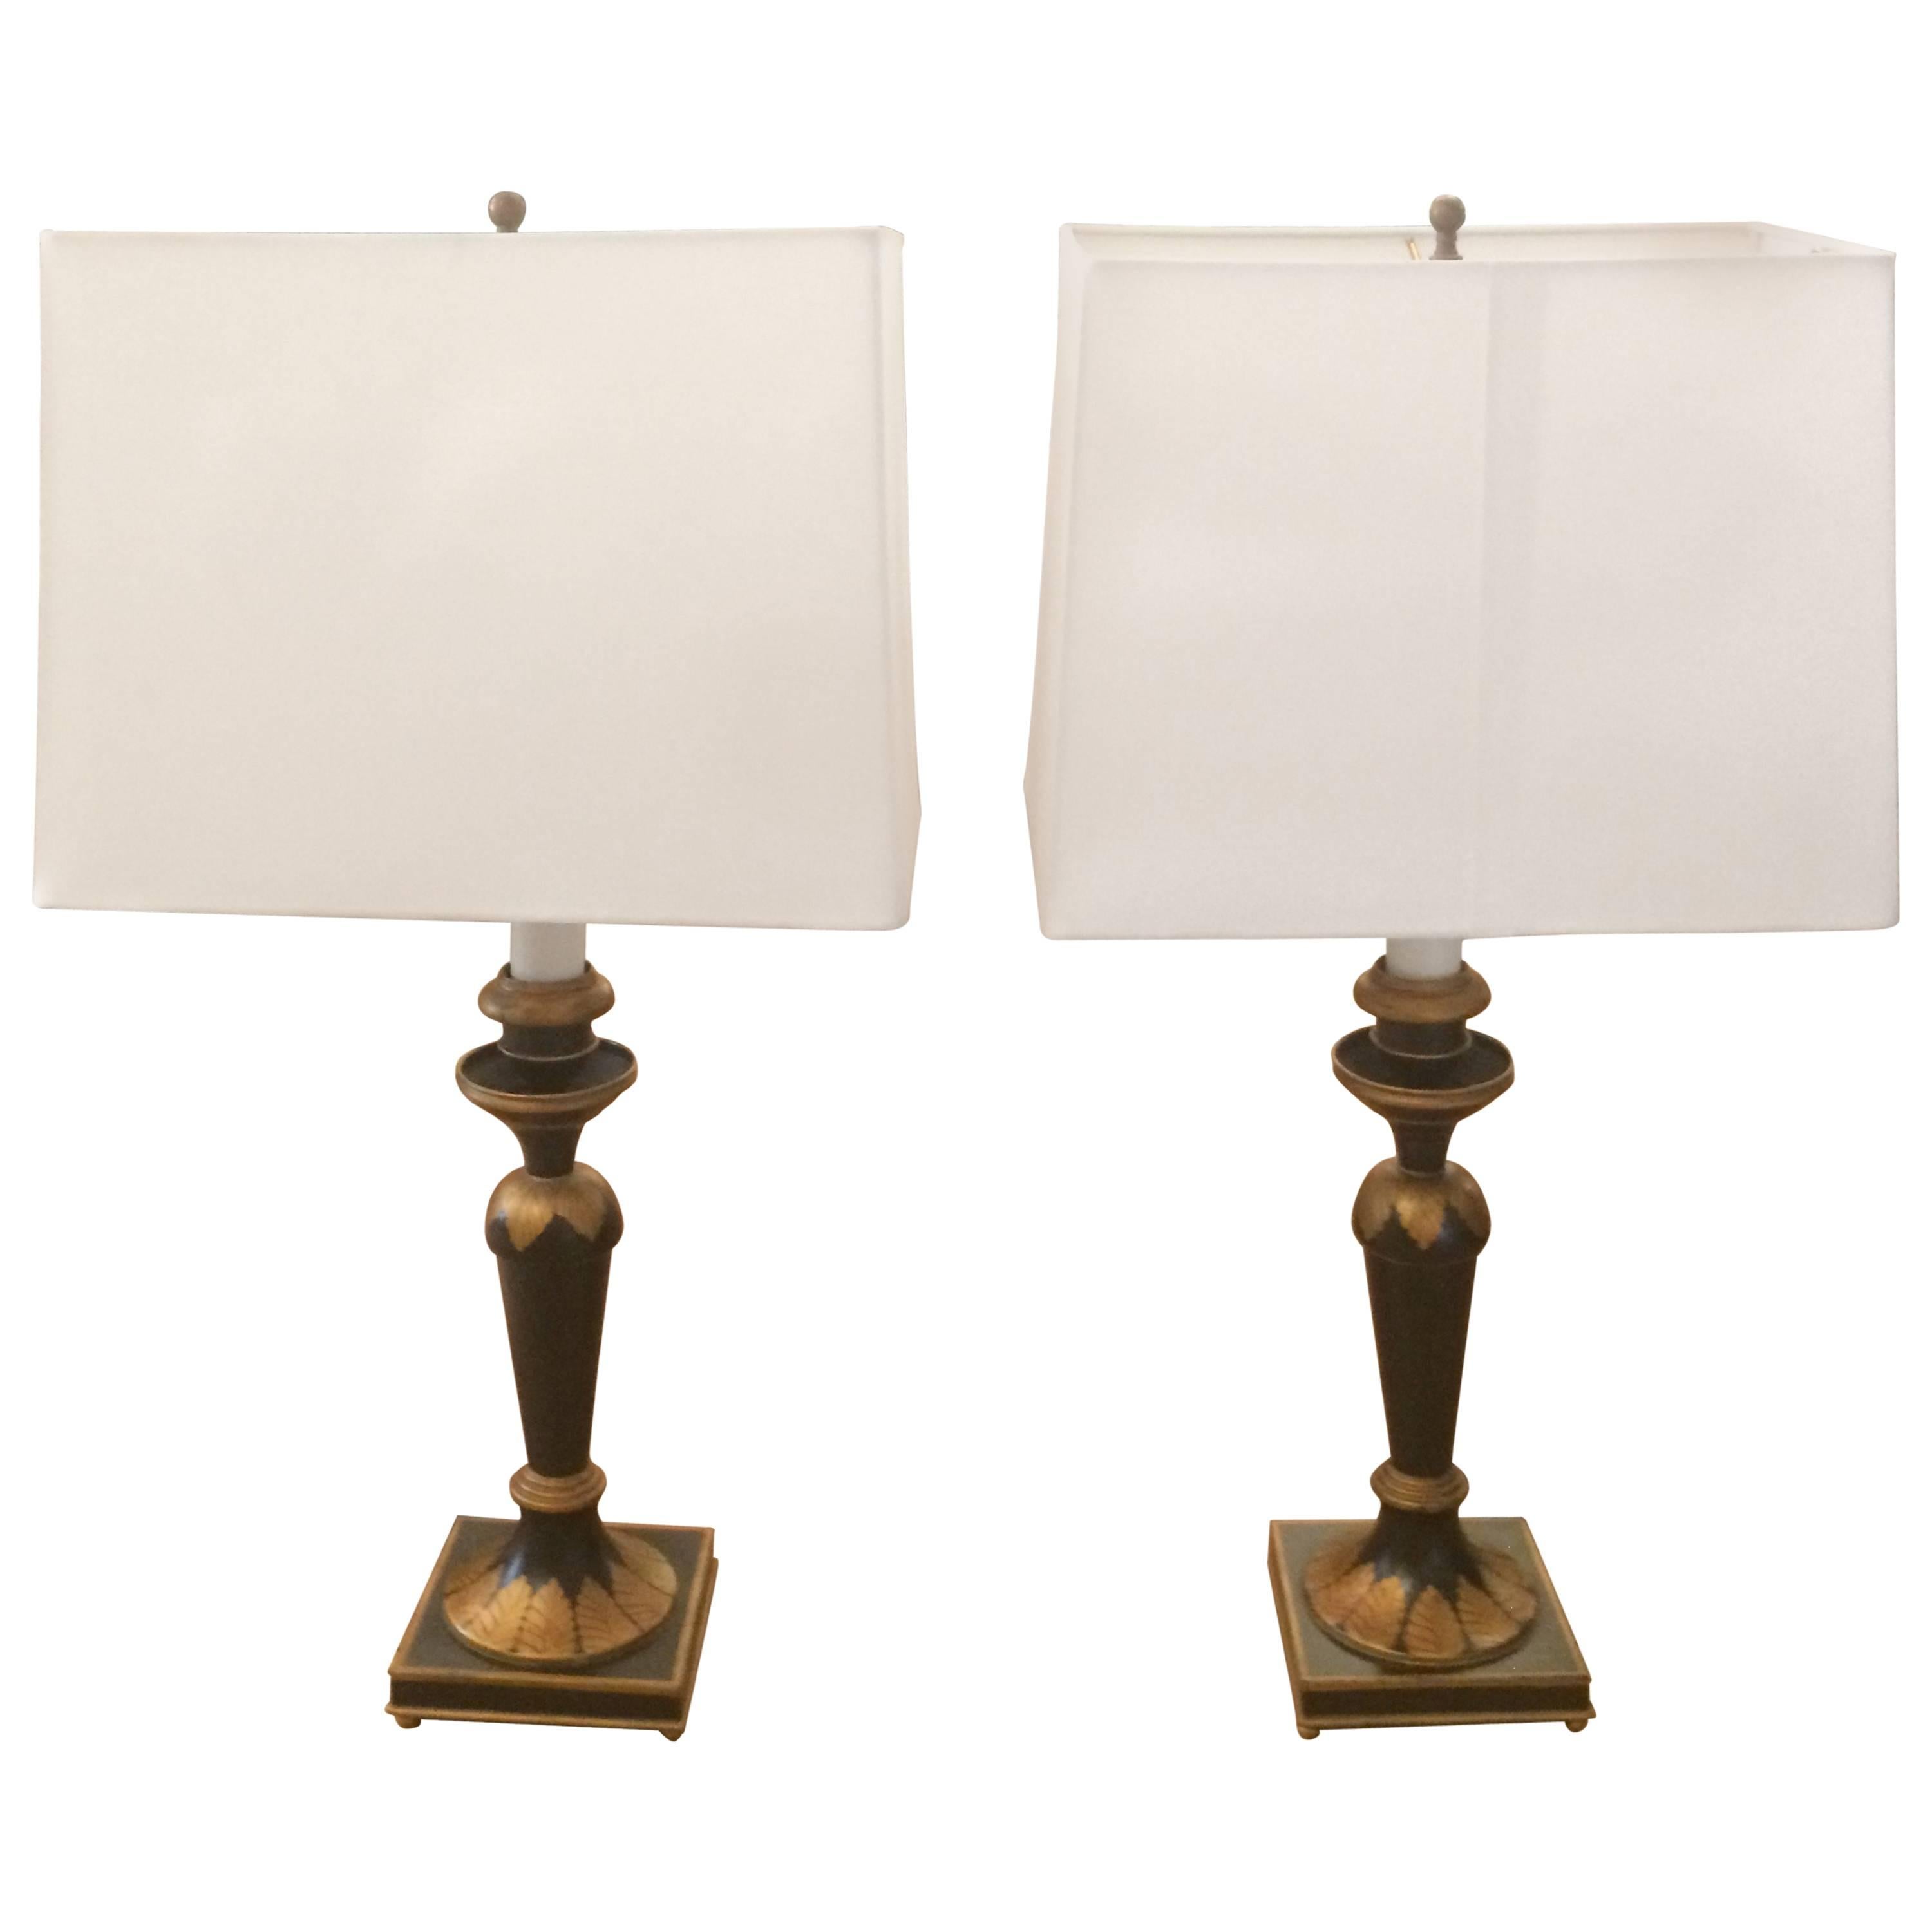 Pair of Ebonized and Gold Table Lamps